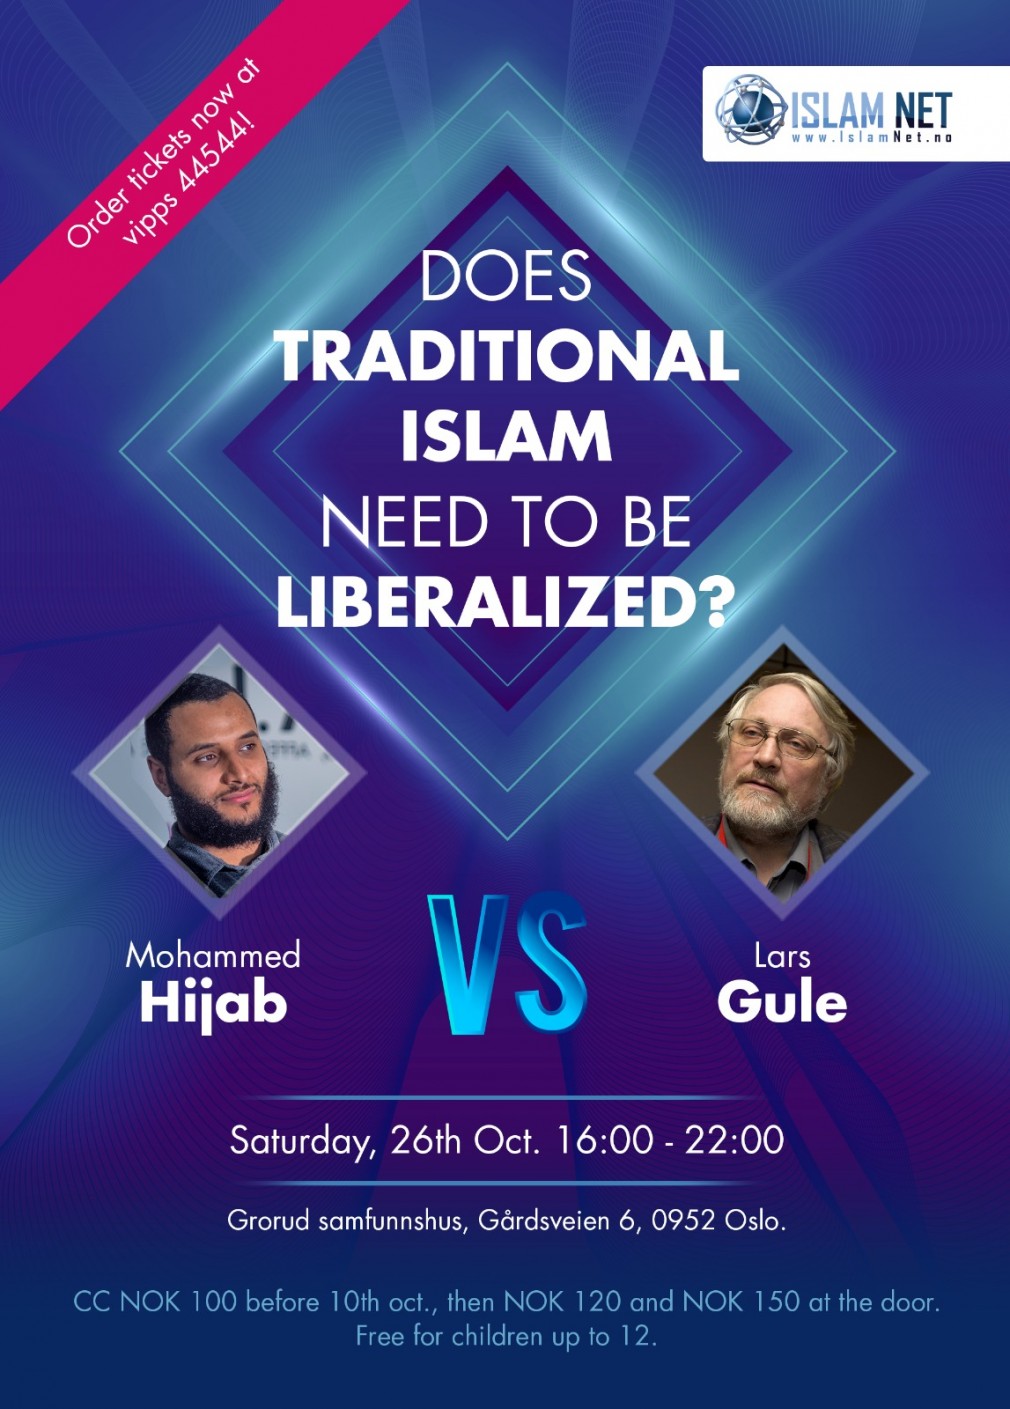 Does Traditional Islam Need to be Liberalized? | Mohammed Hijab VS Lars Gule